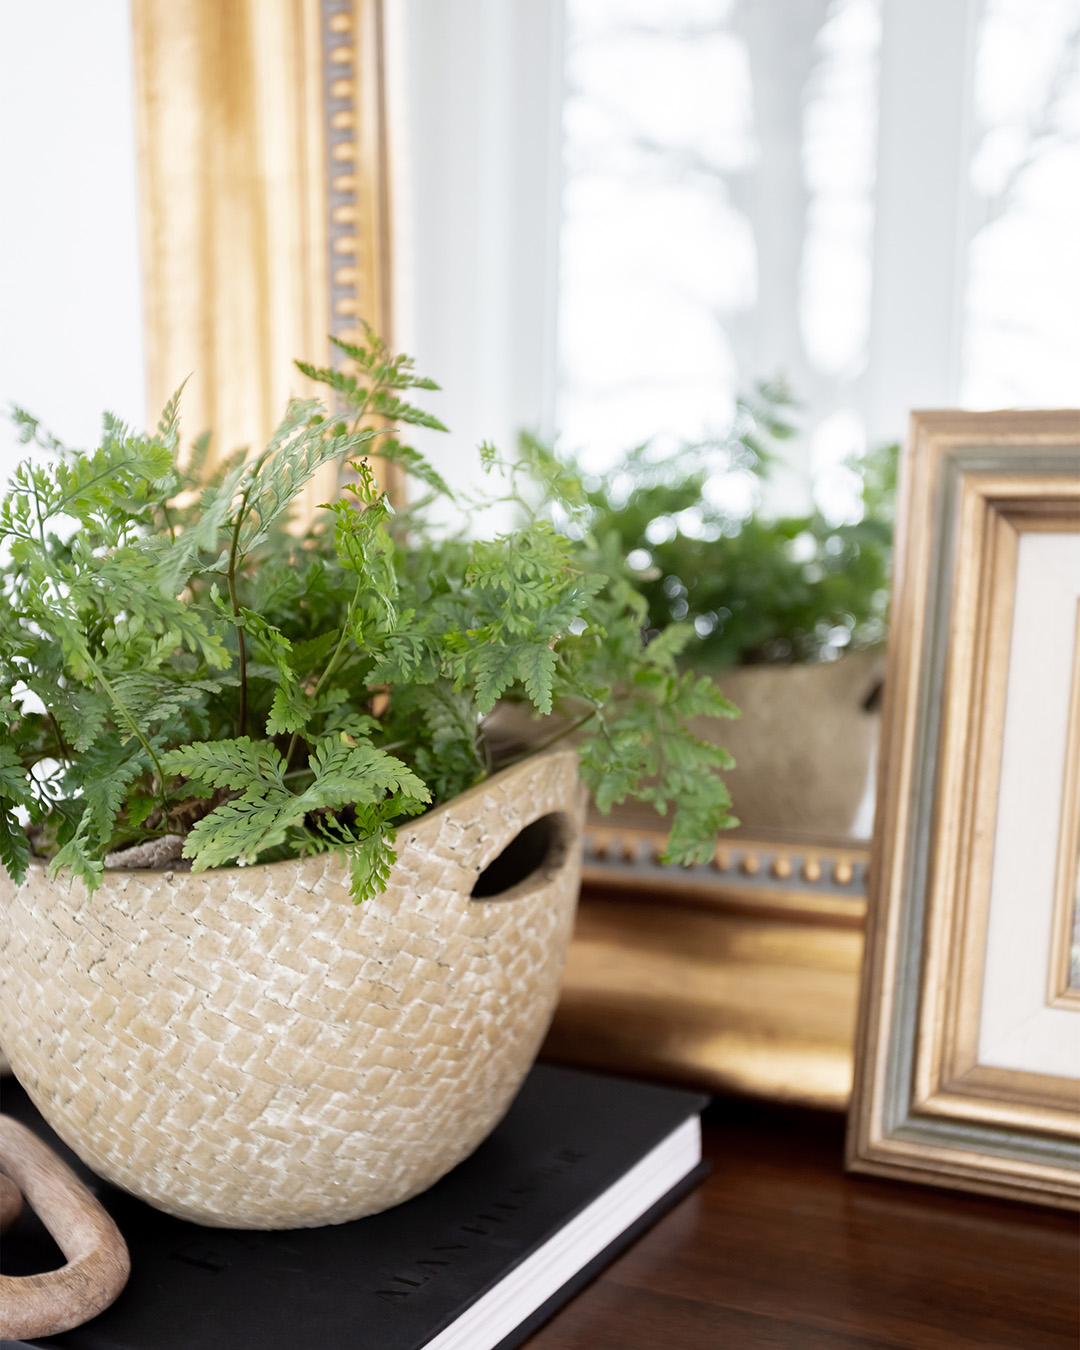 I've always loved ferns but I've killed them so quickly in the past until I learned about this special plant called a Rabbit's Foot Fern. It's definitely the easiest fern to grow!